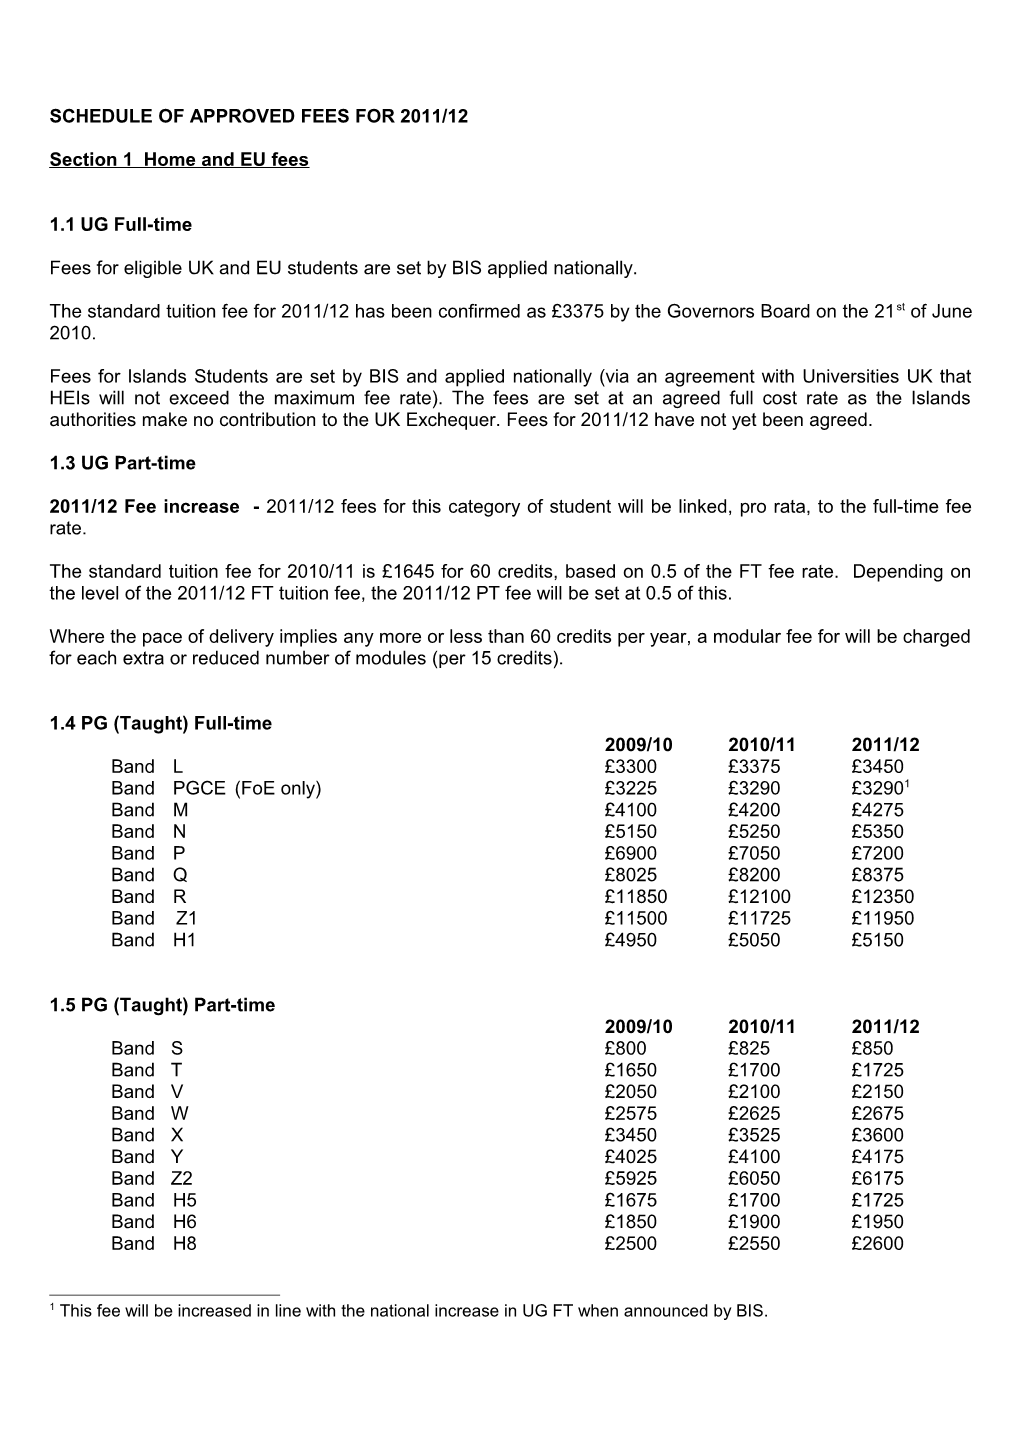 Schedule of Approved Fees for 2011/12